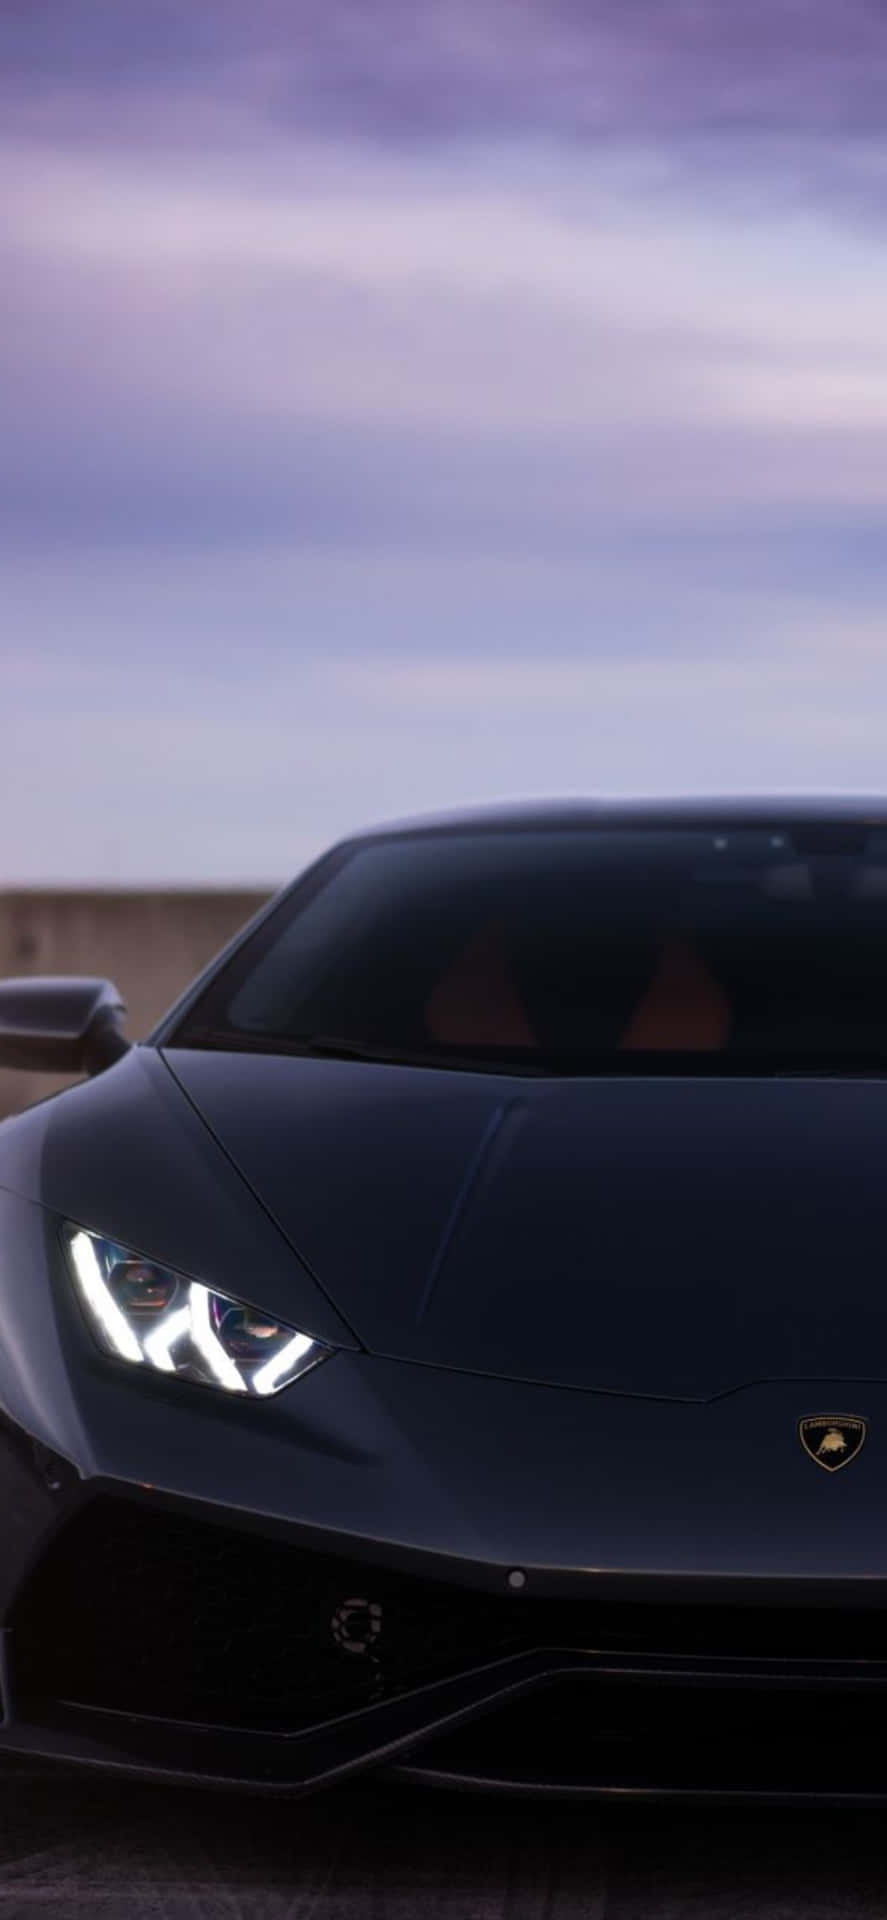 Feel the power and style of the Lamborghini with this iPhone X background.